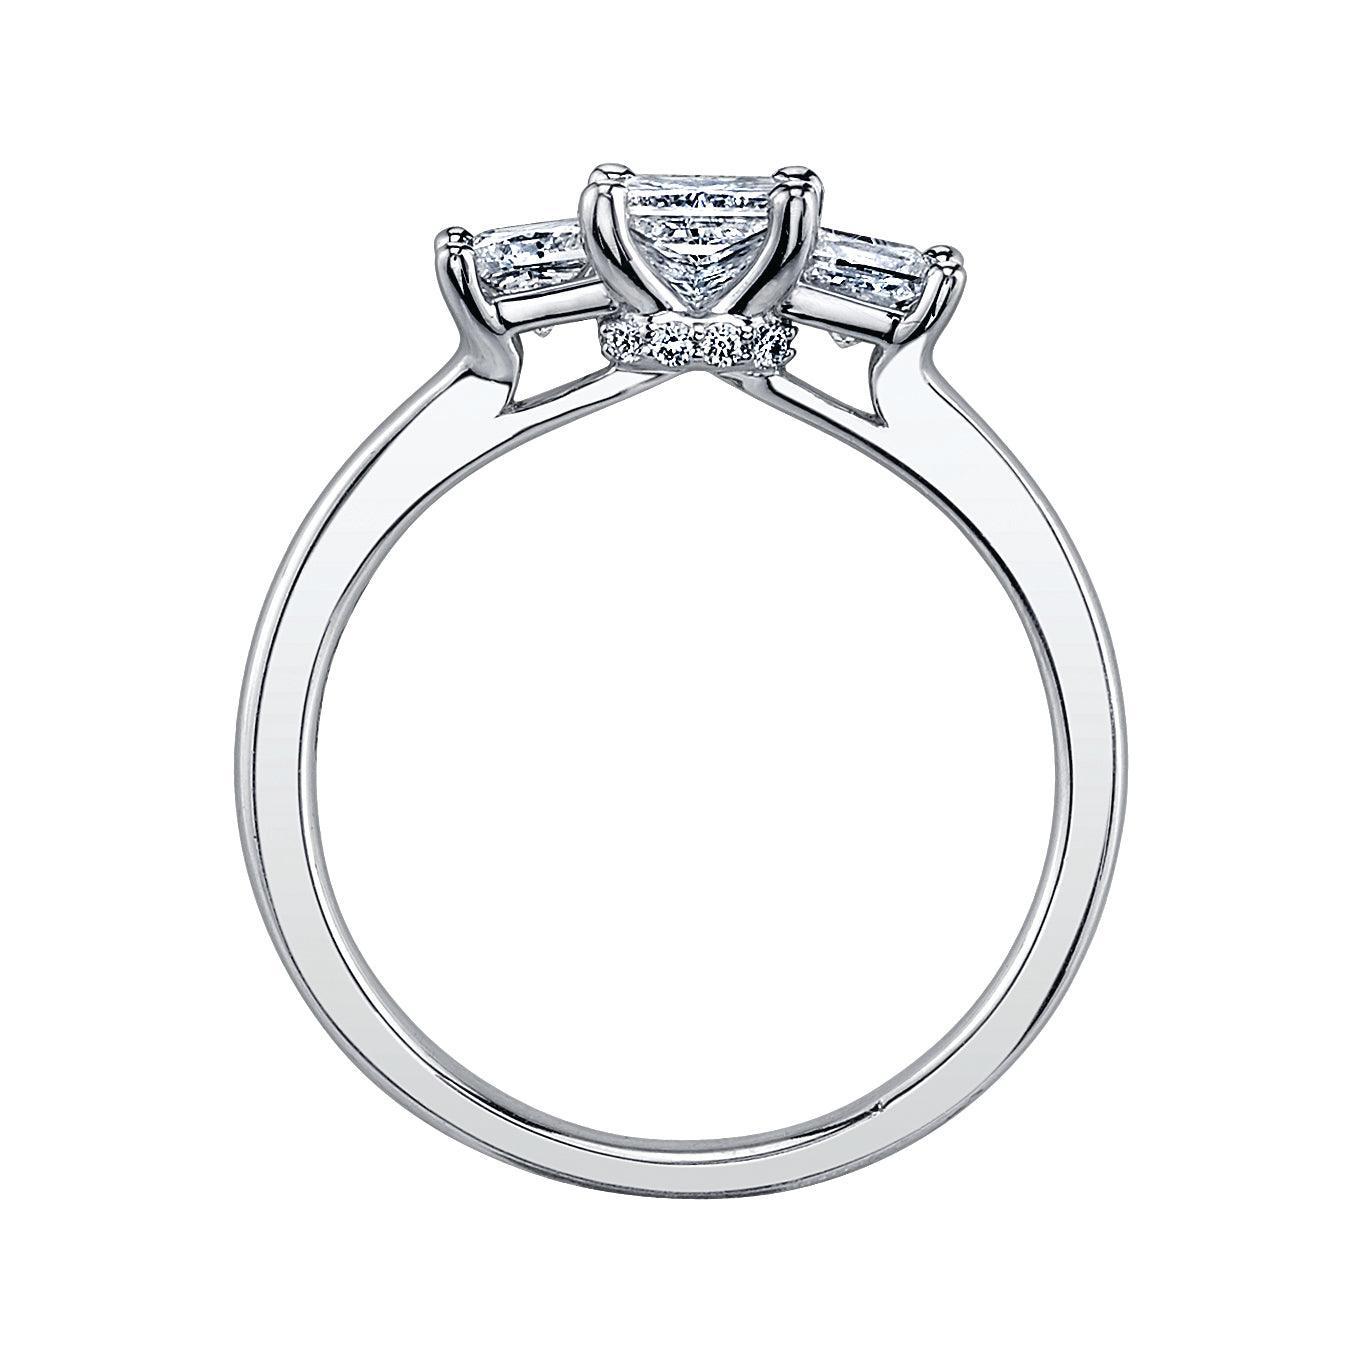 Maple Leaf Diamonds™ Circle of Love Princess Cut Diamond Trilogy Engagement Ring in 18ct White Gold - Wallace Bishop